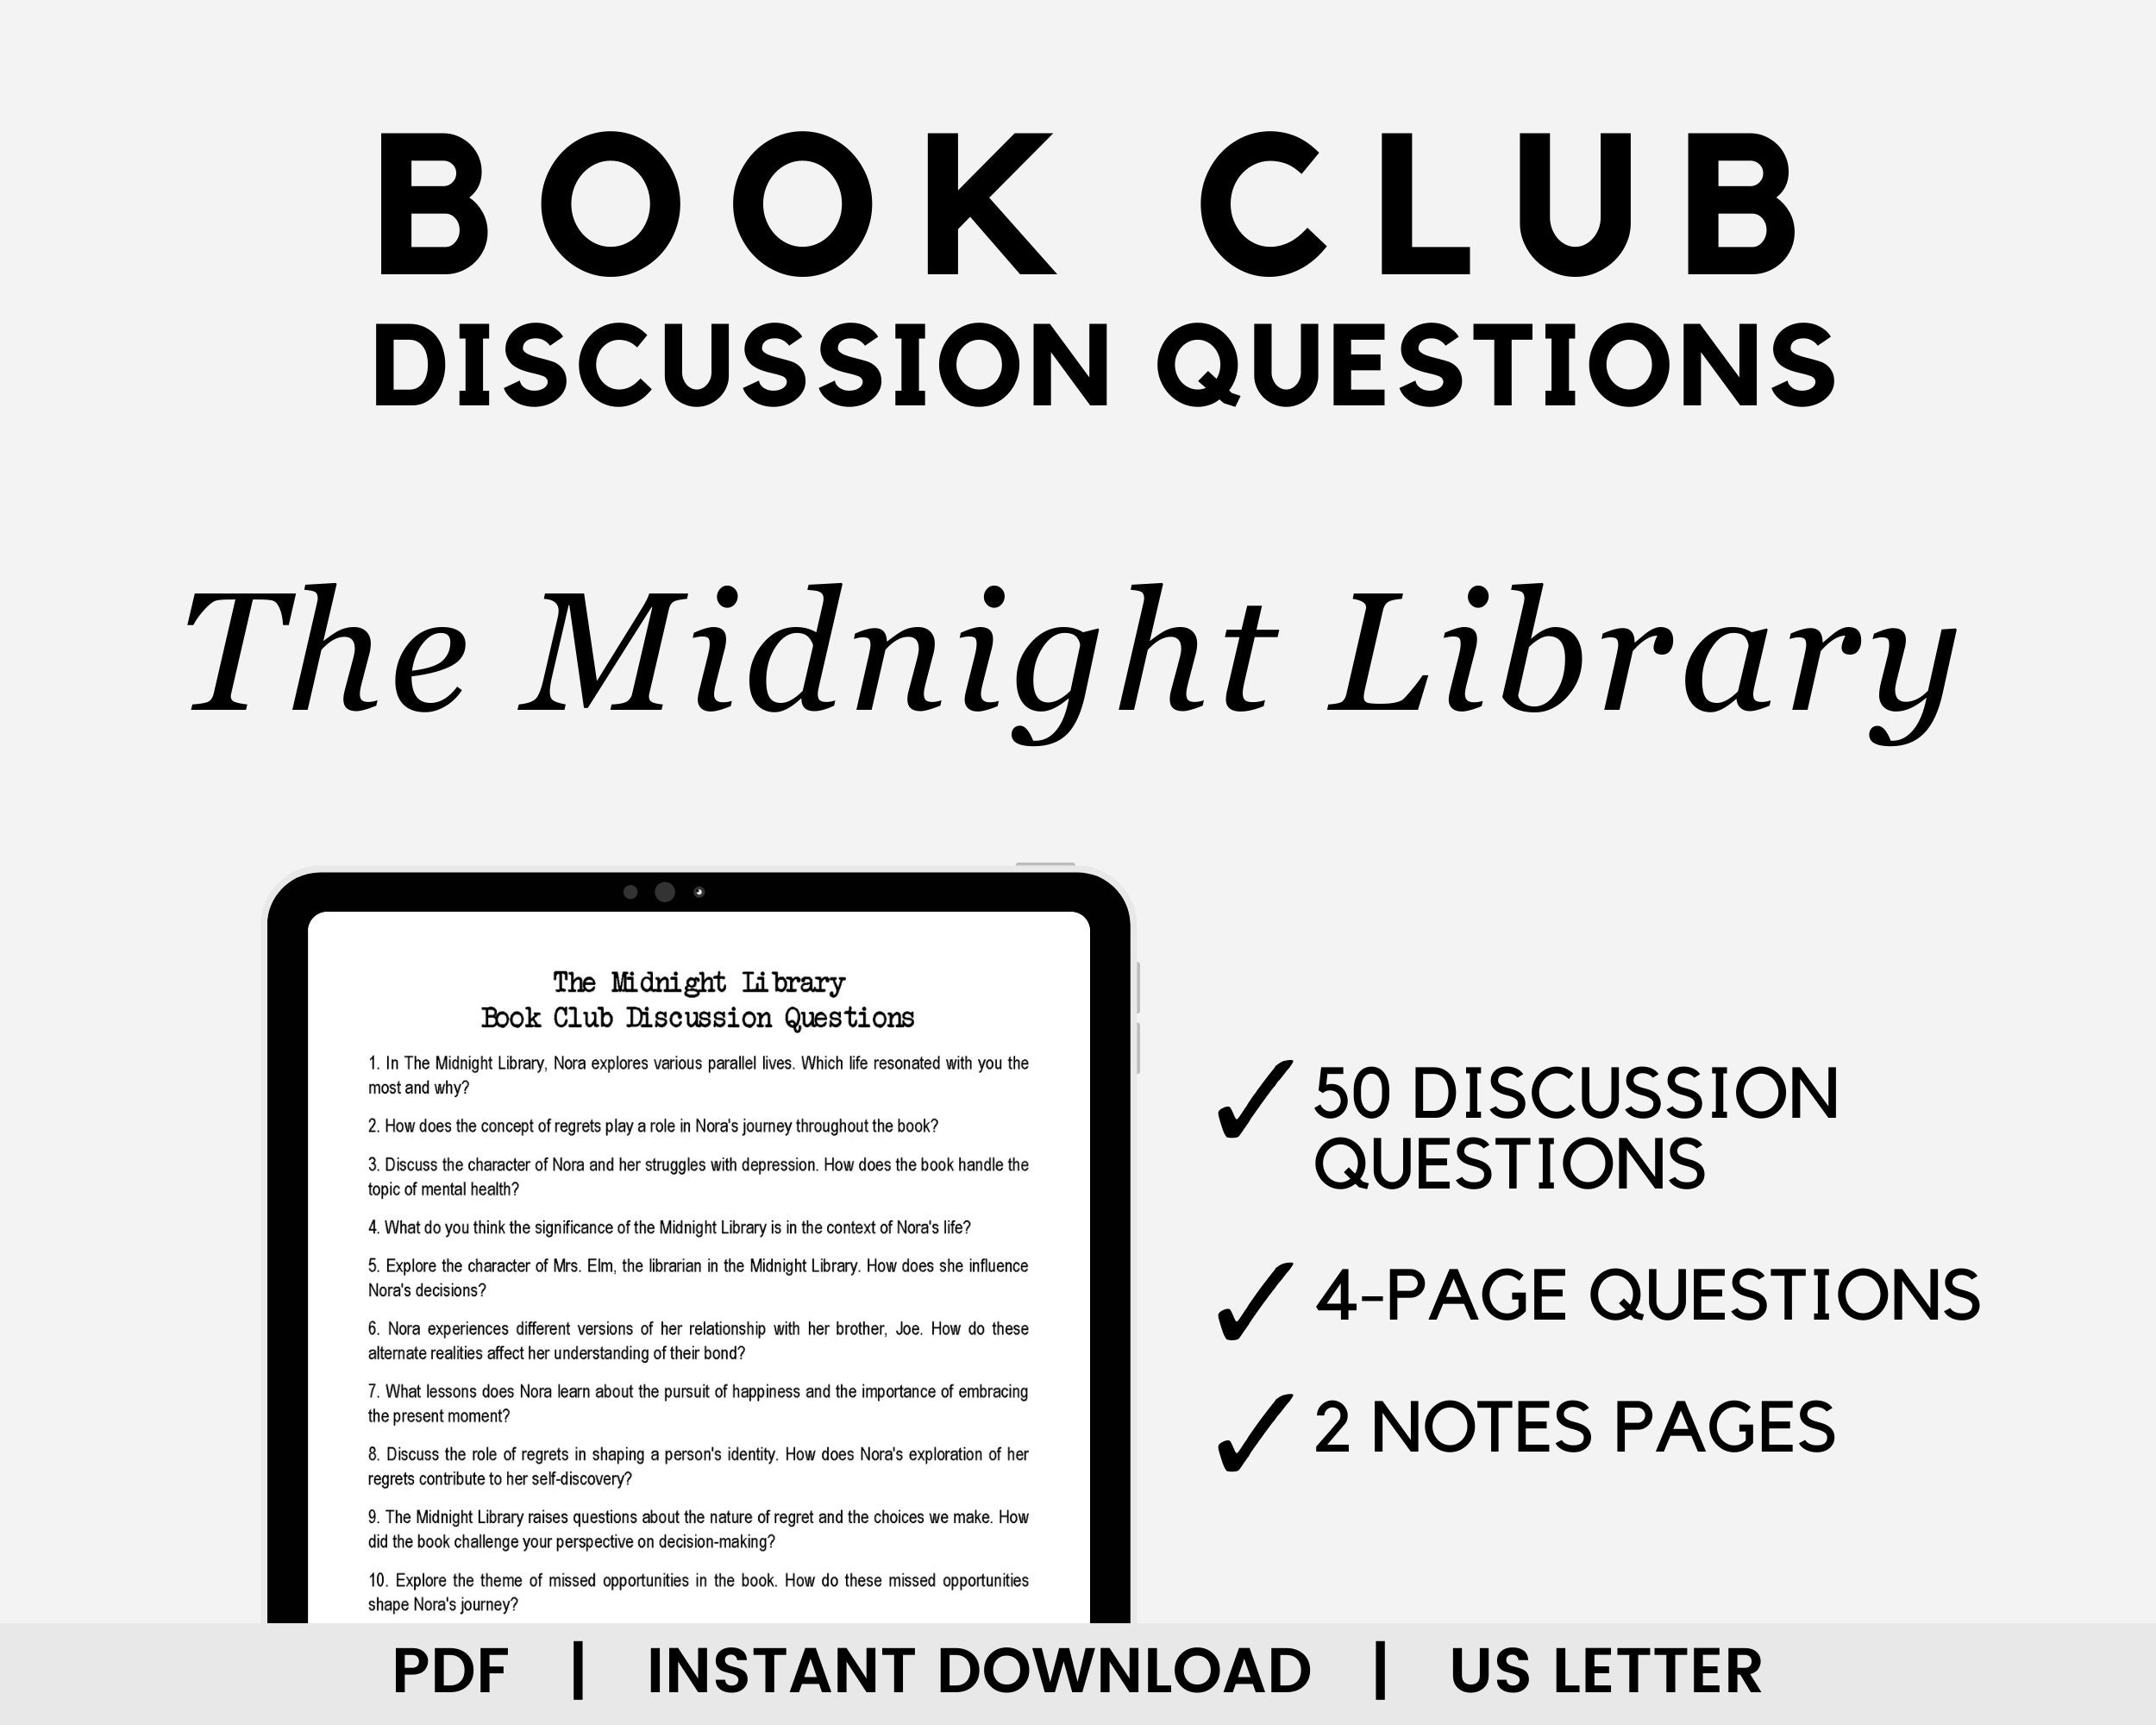 Club　Library　Book　Book　Club　Questions　Discussion　Etsy　The　Midnight